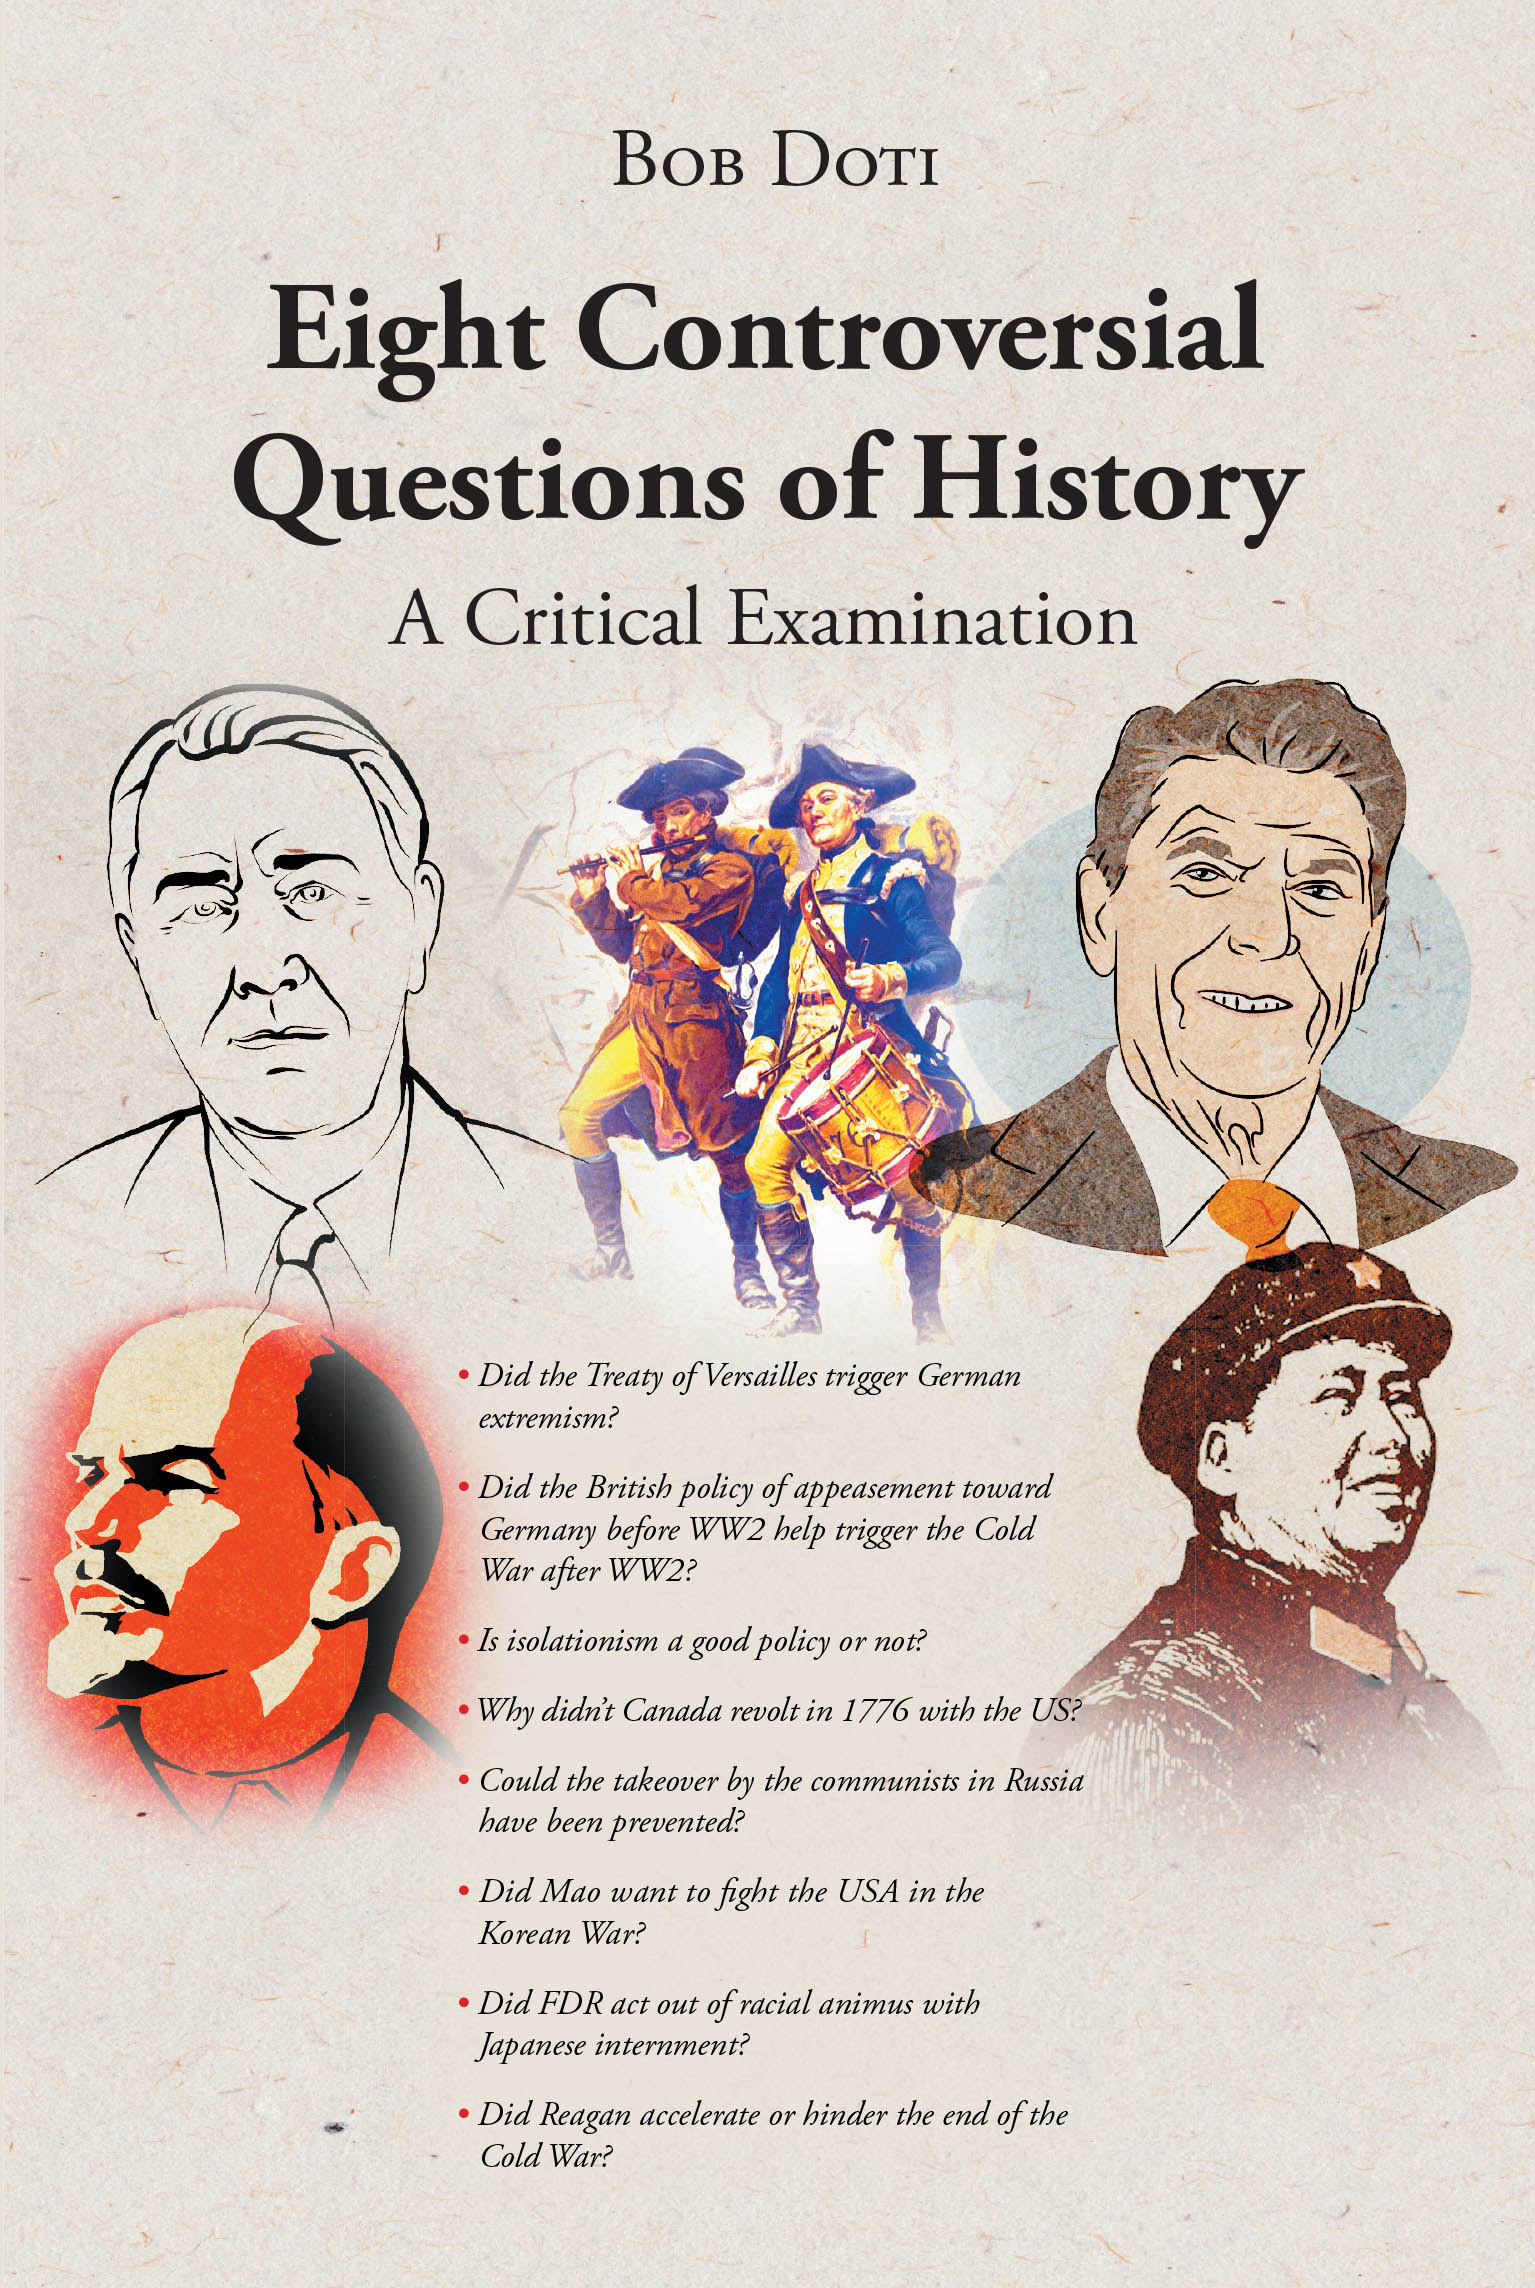 Author Bob Doti’s New Book, "Eight Controversial Questions of History: A Critical Examination," is a Compelling Series Exploring Key Themes in History and Politics